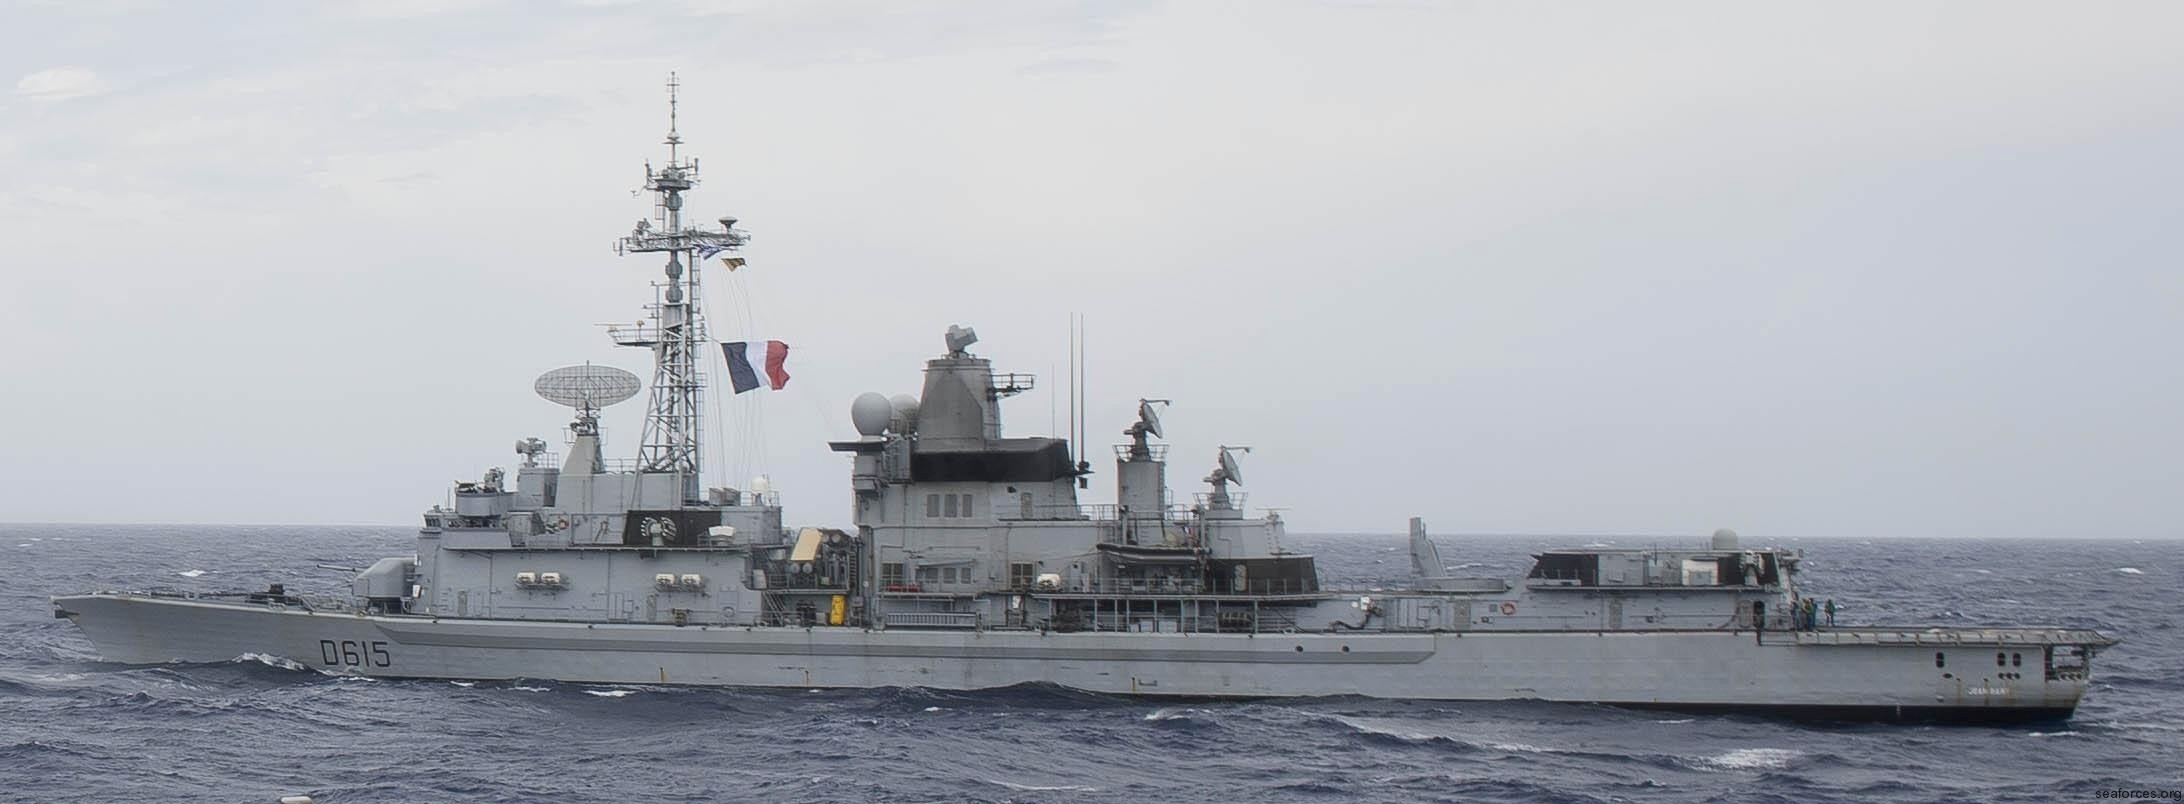 d-615 fs jean bart cassard f70aa class guided missile frigate ffgh ddg french navy marine nationale 24